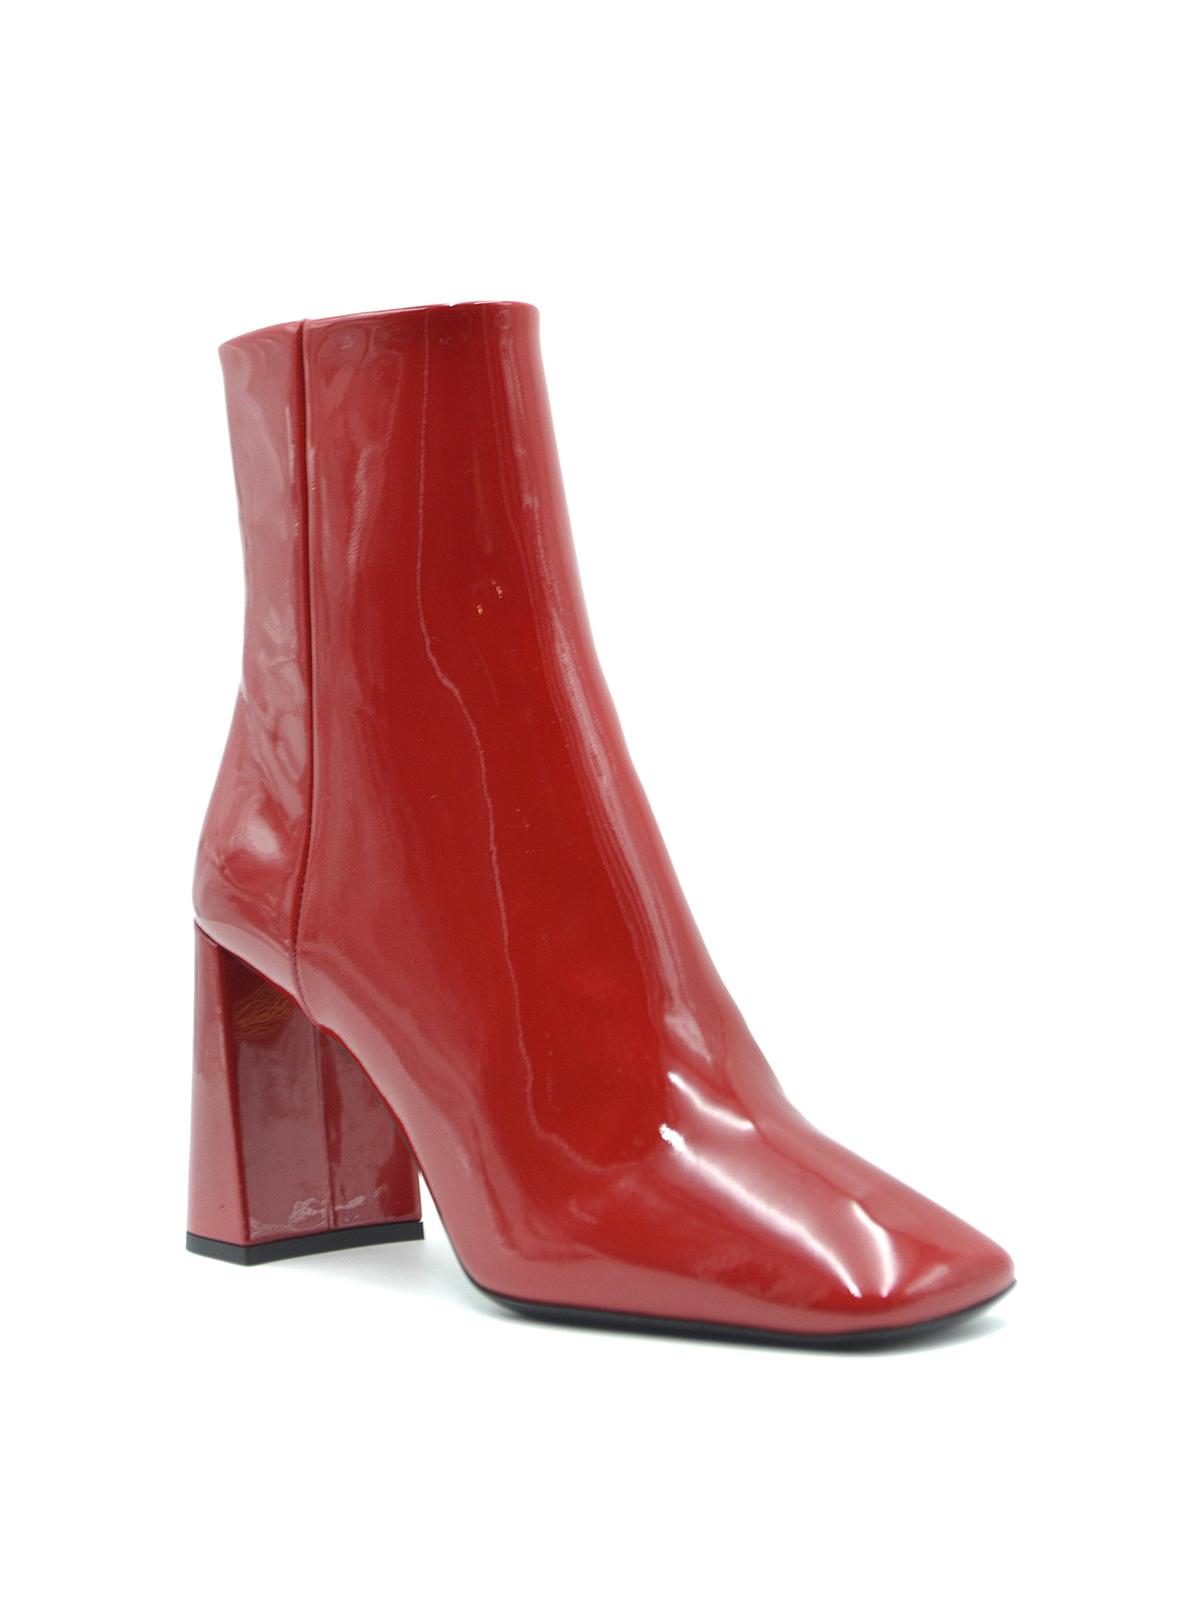 Prada Patent-leather Ankle Boot in Red - Lyst